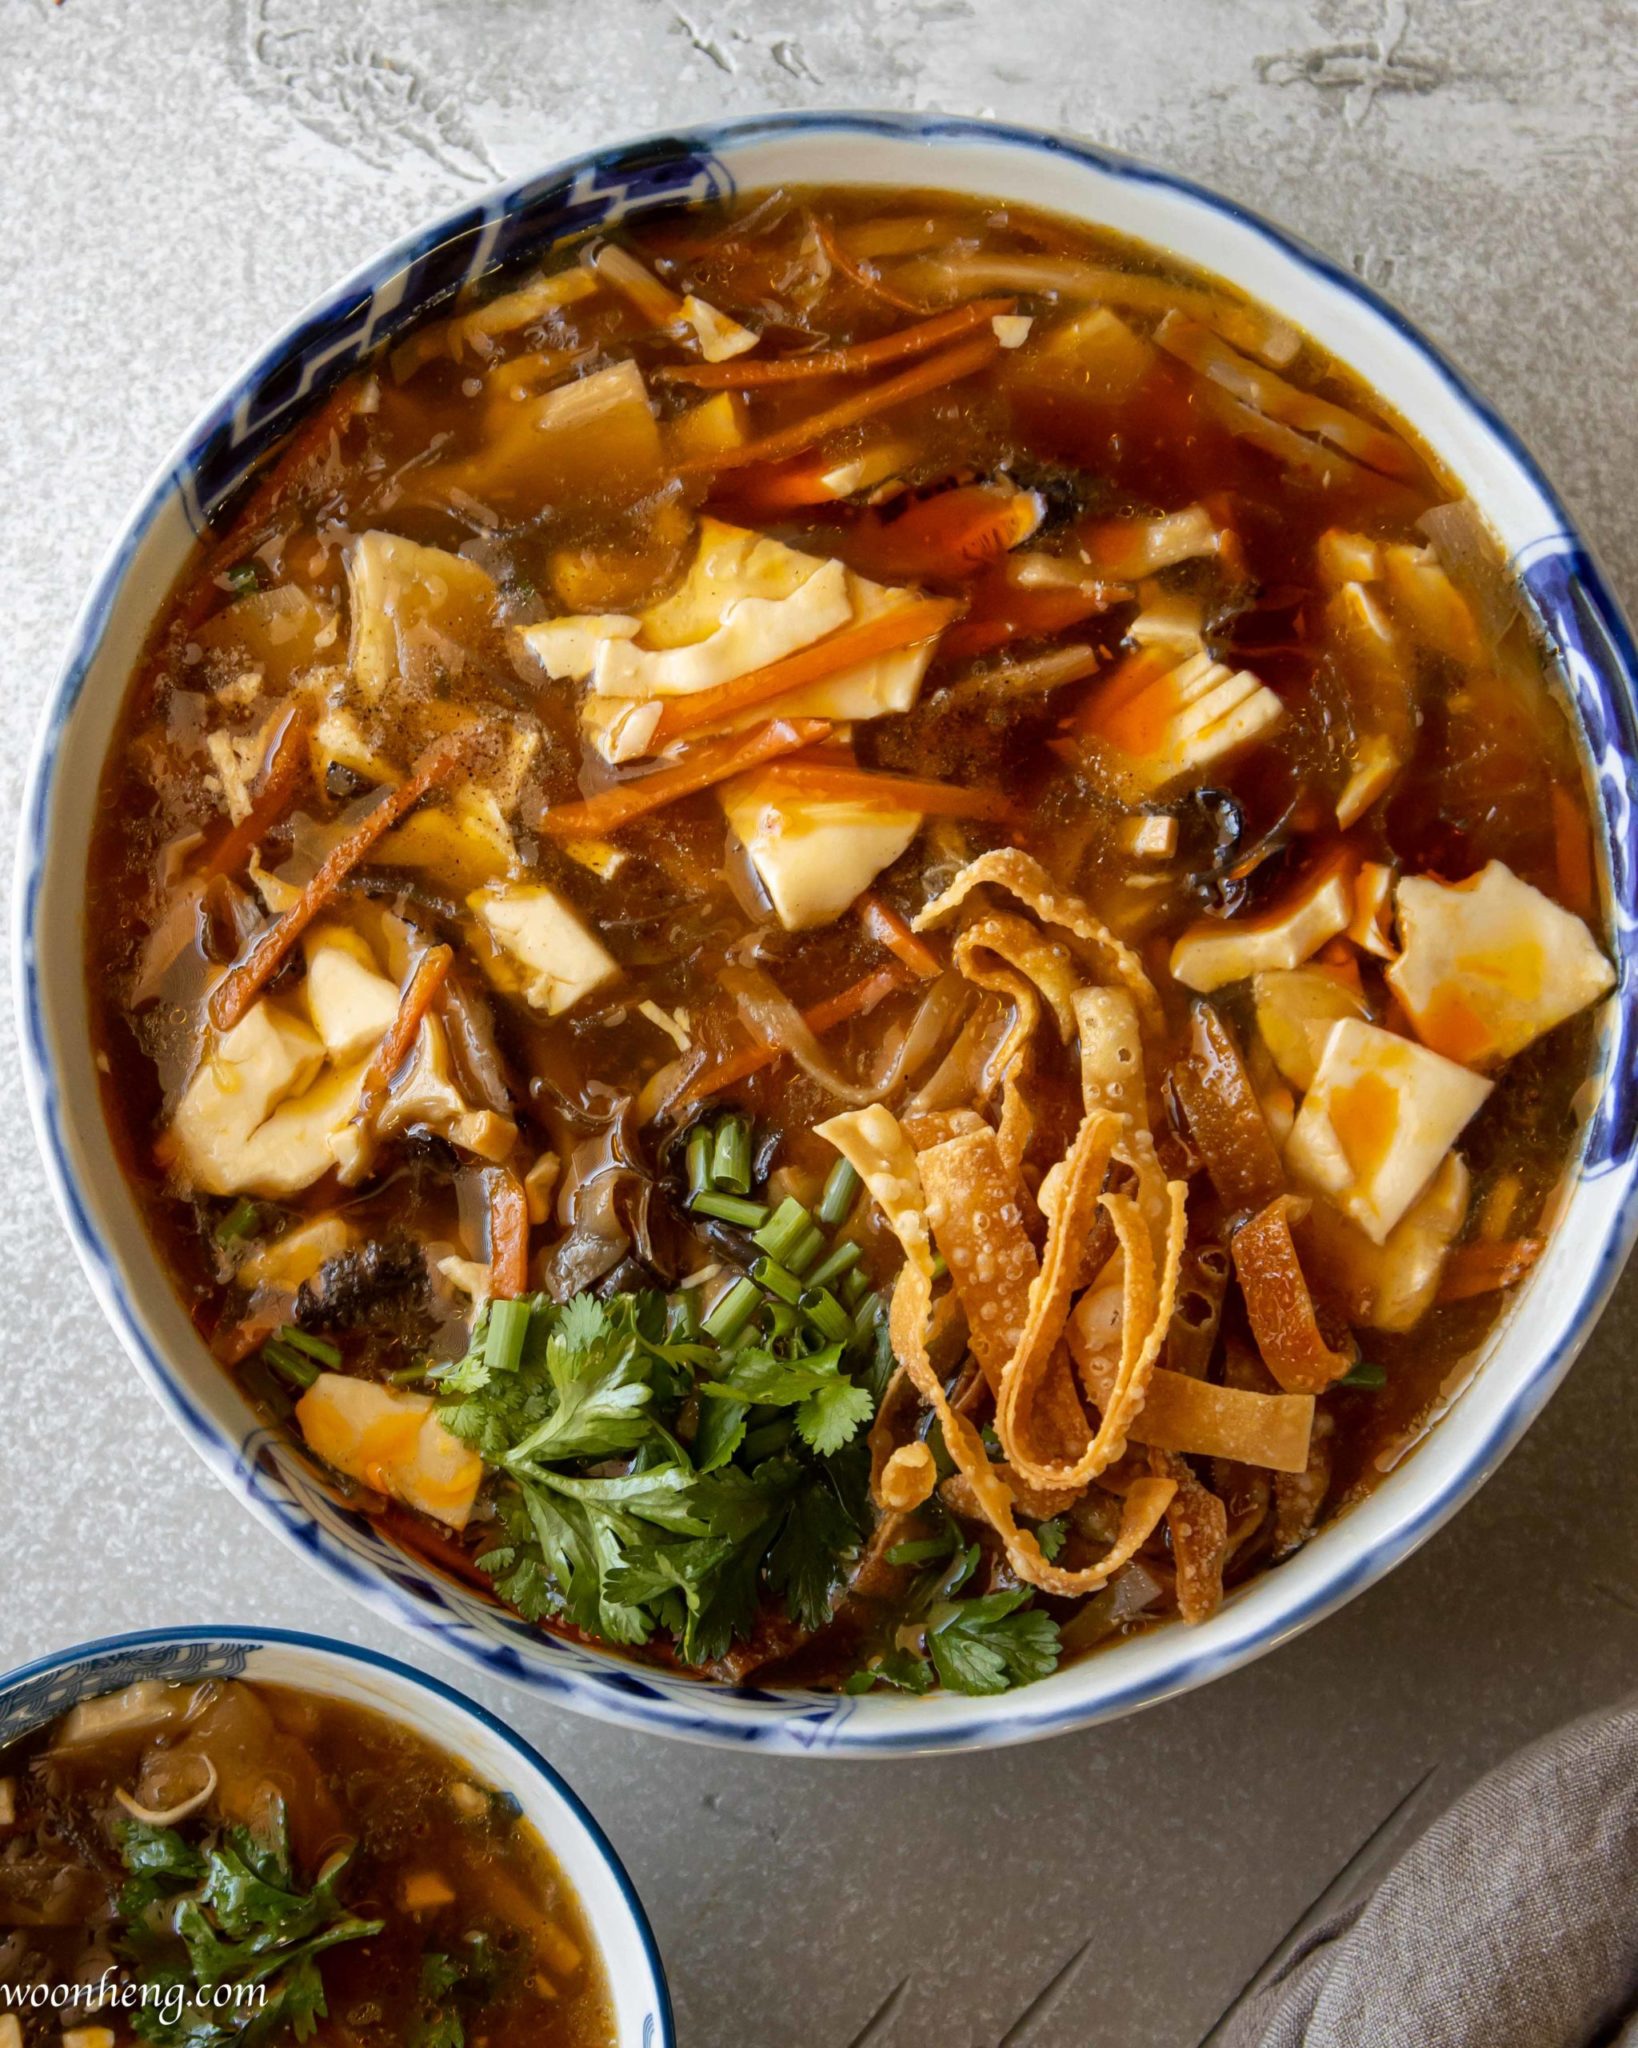 The Best Vegan Hot and Sour soup (Easy step-by-step) - WoonHeng